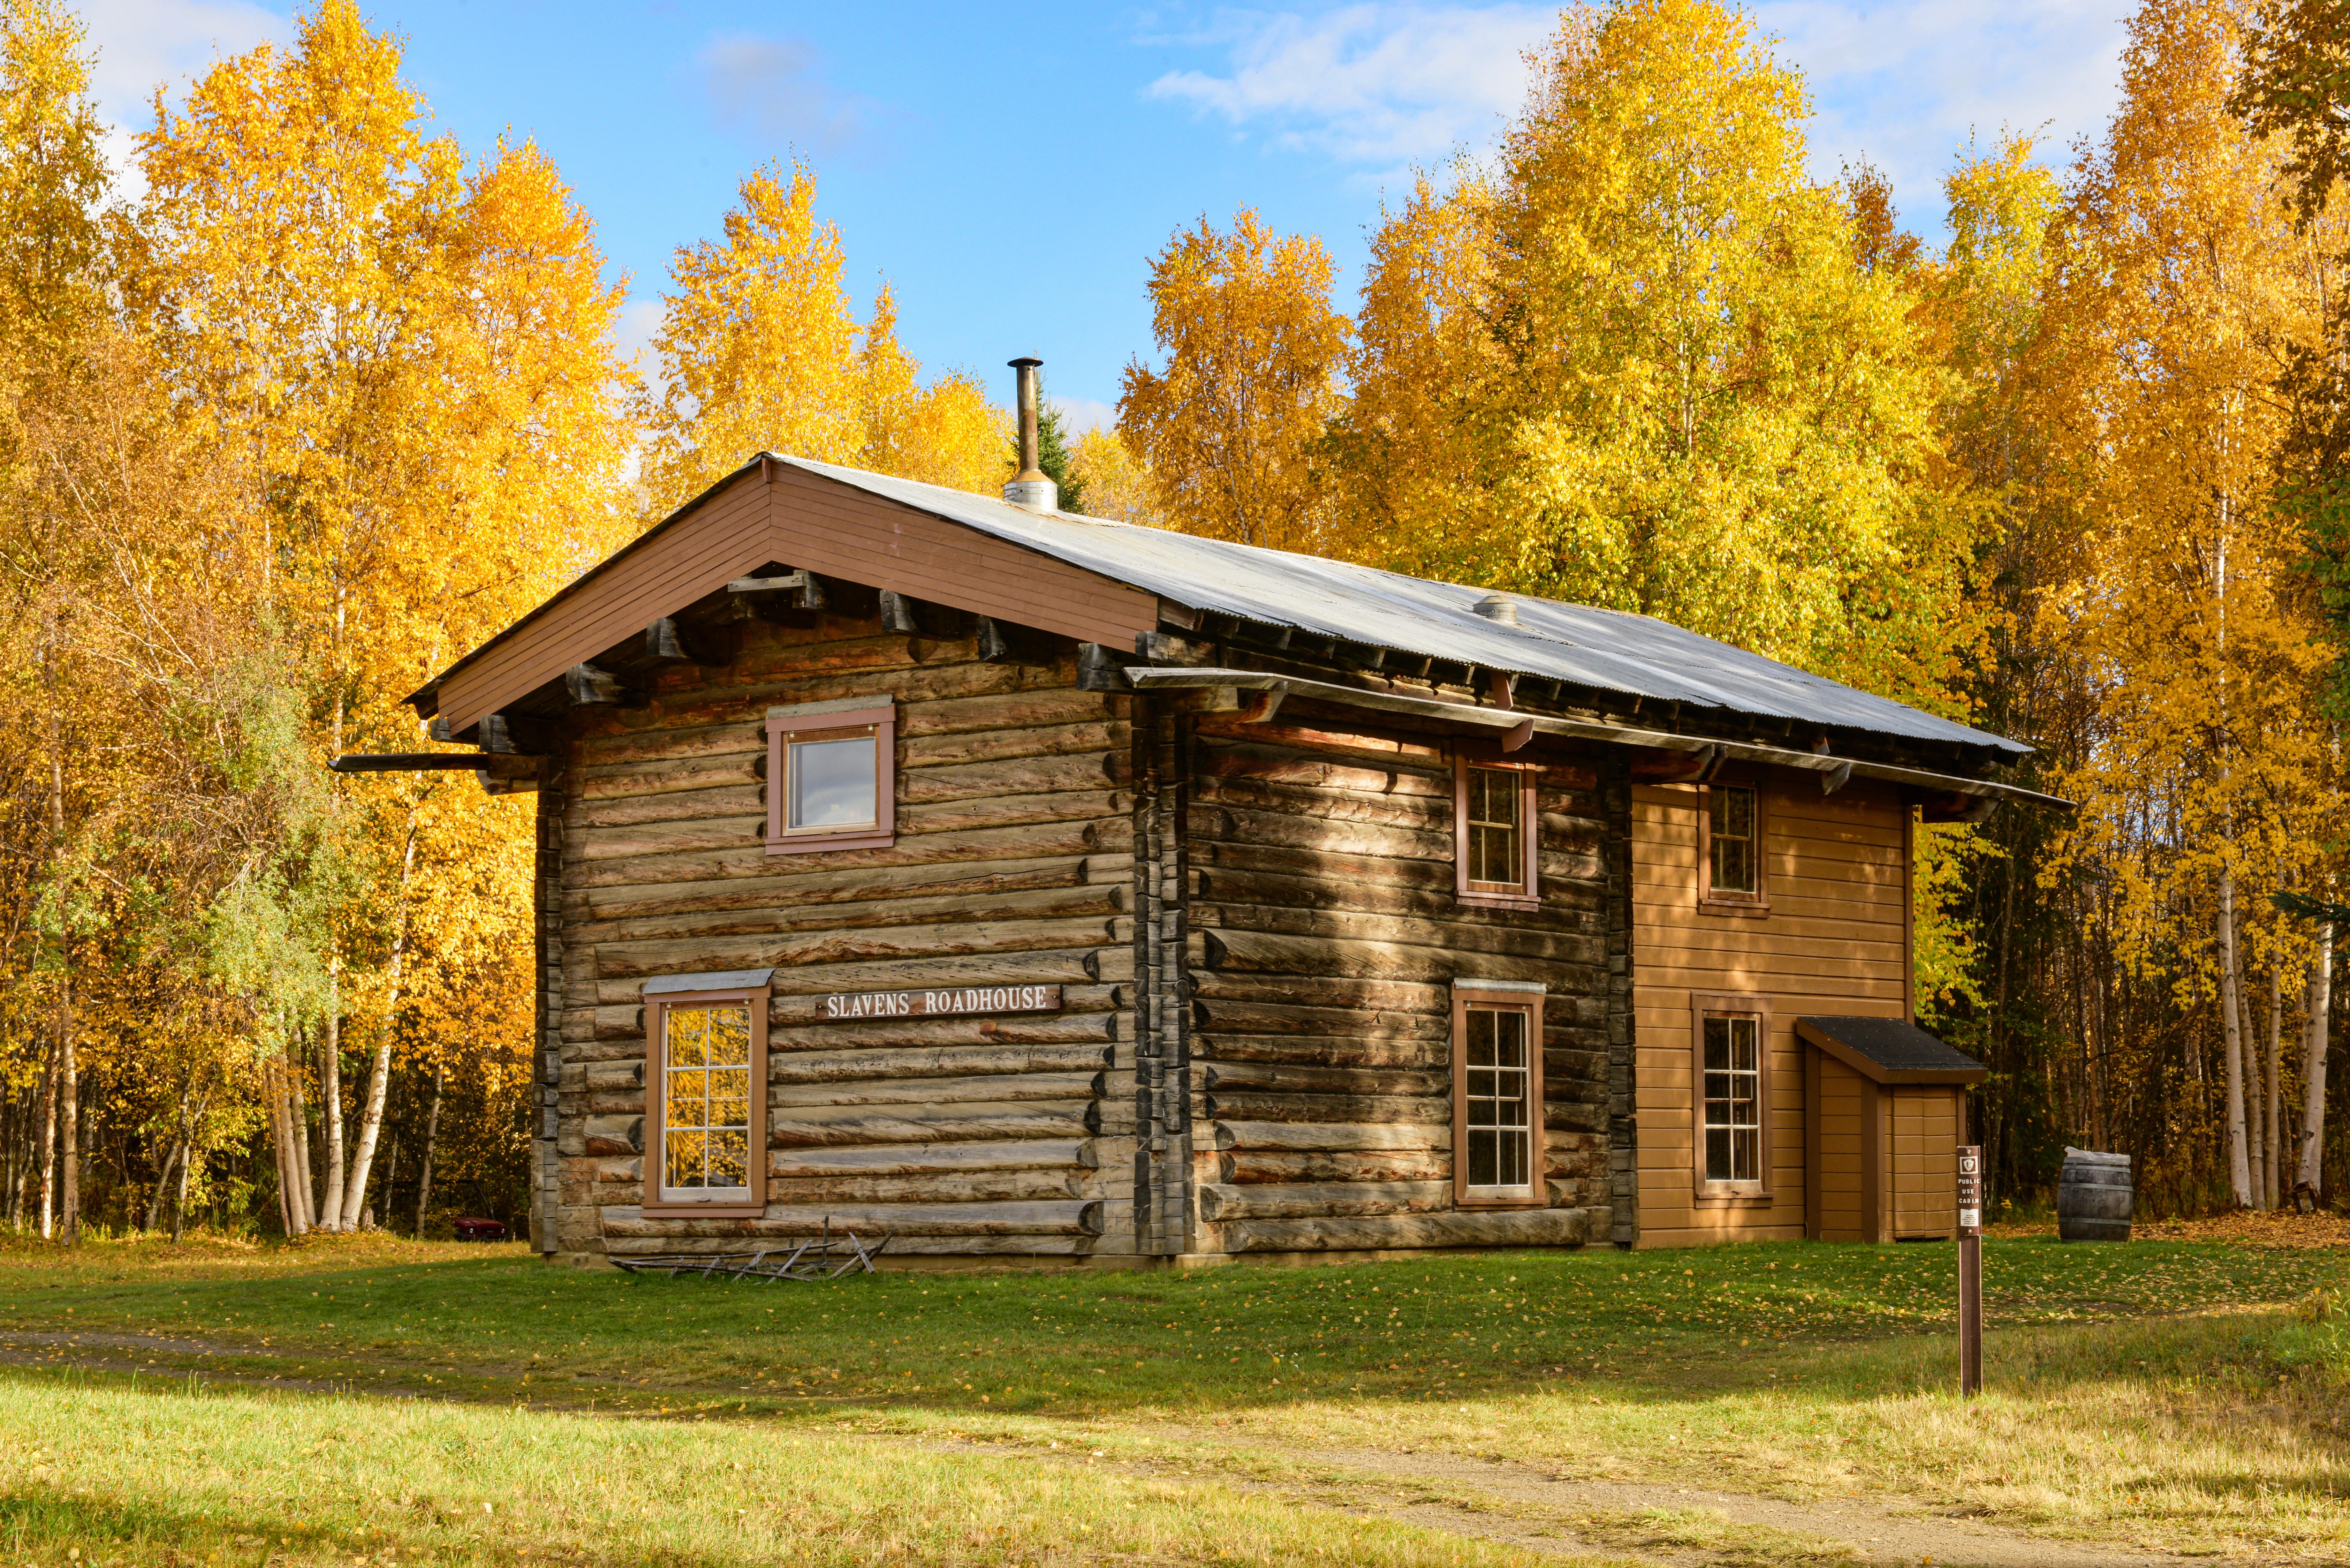 Slaven's Roadhouse during fall colors